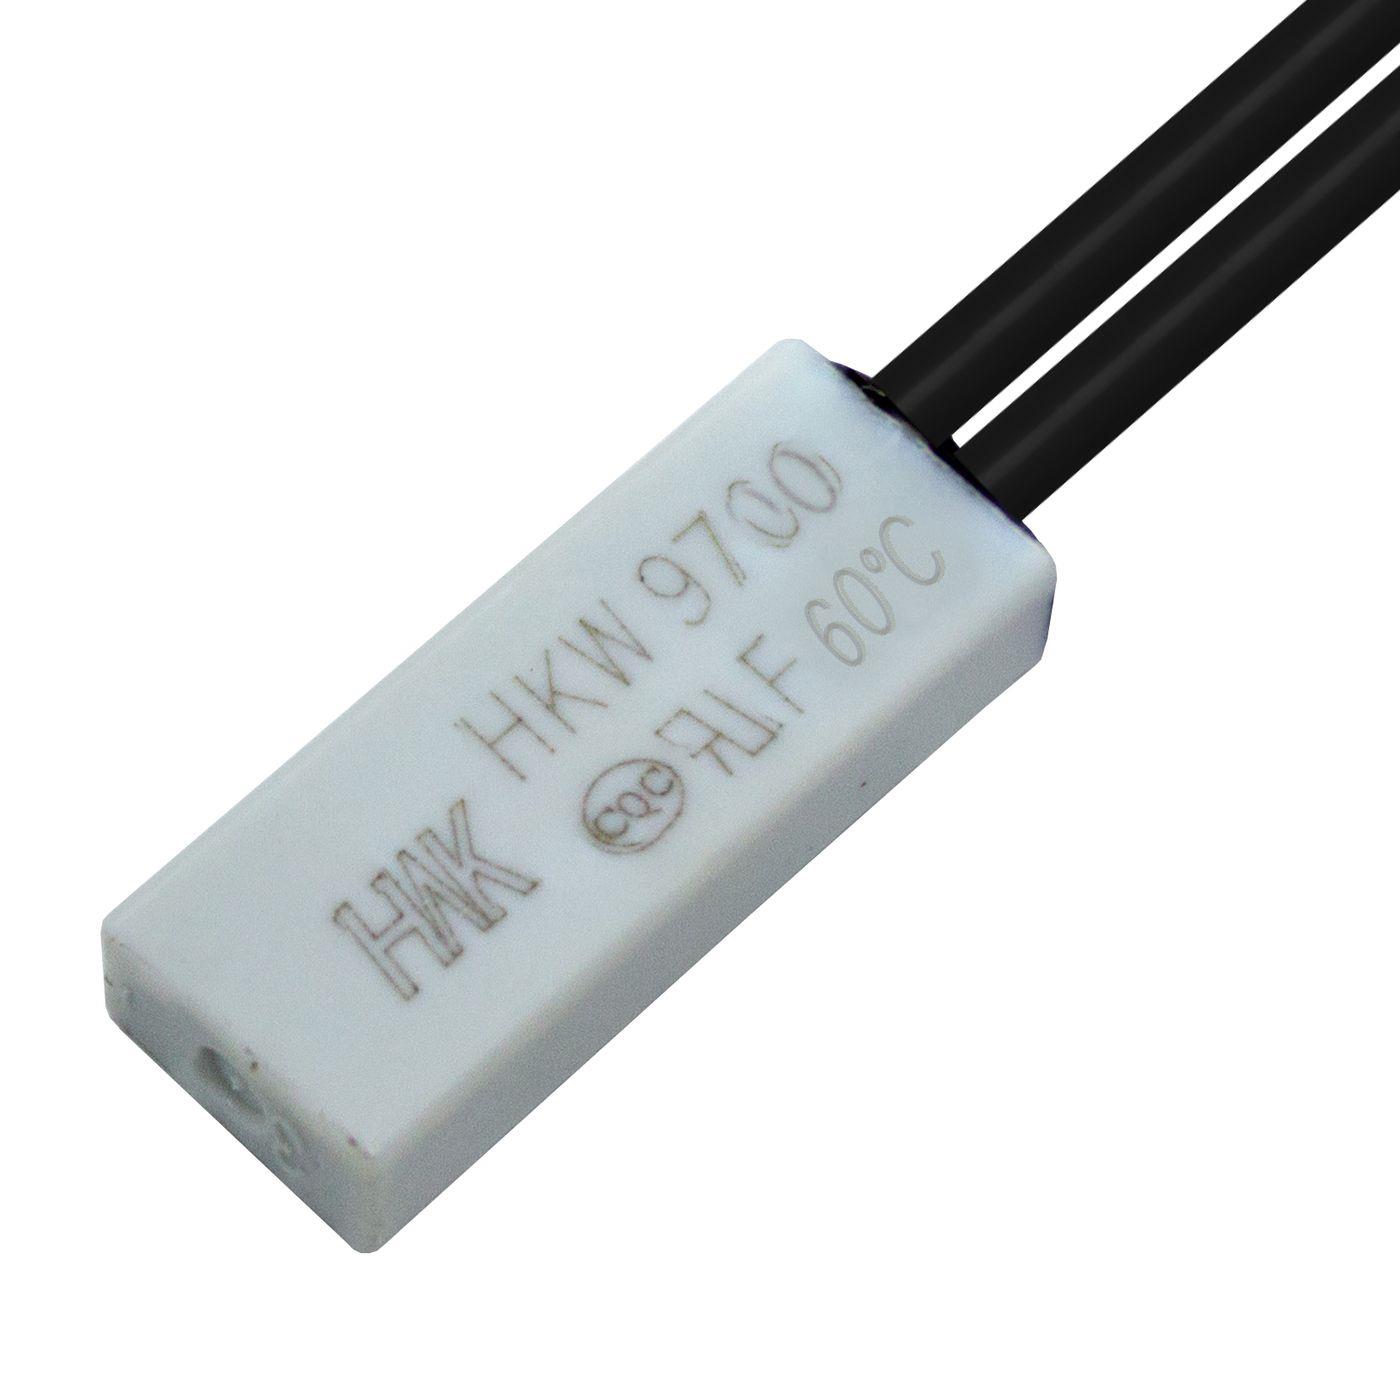 Thermal switch 60°C NO contact 250V 5A Cable Temperature switch thermostat Bimetal Thermal protection